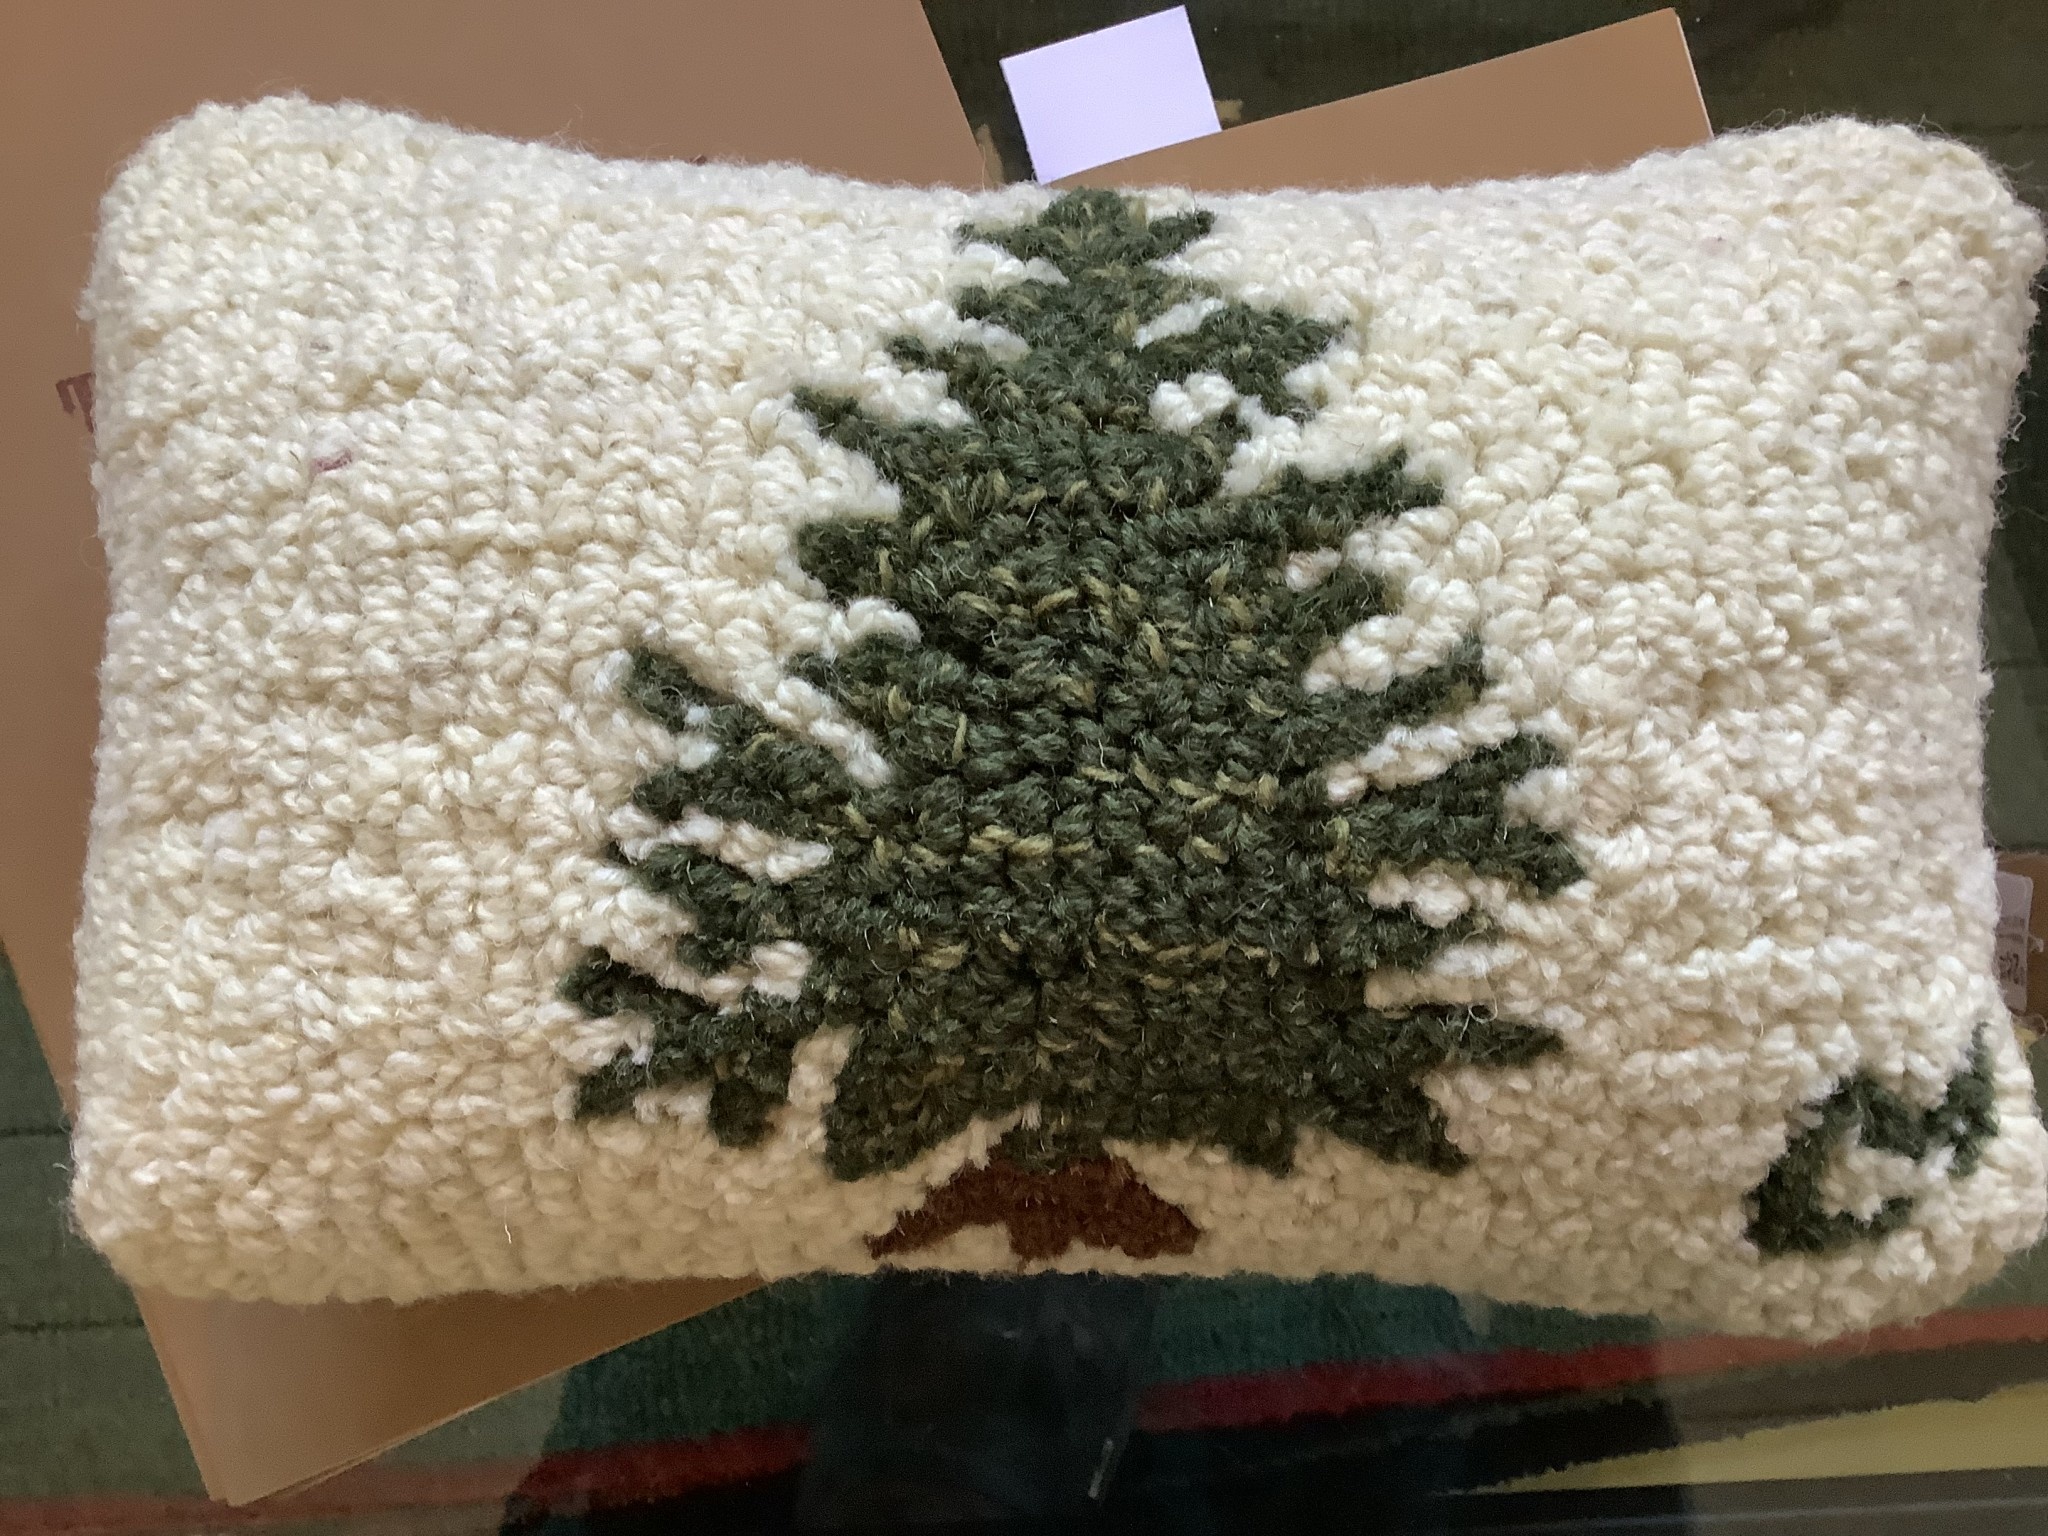 The Birch Store Little Tree Hooked Pillow